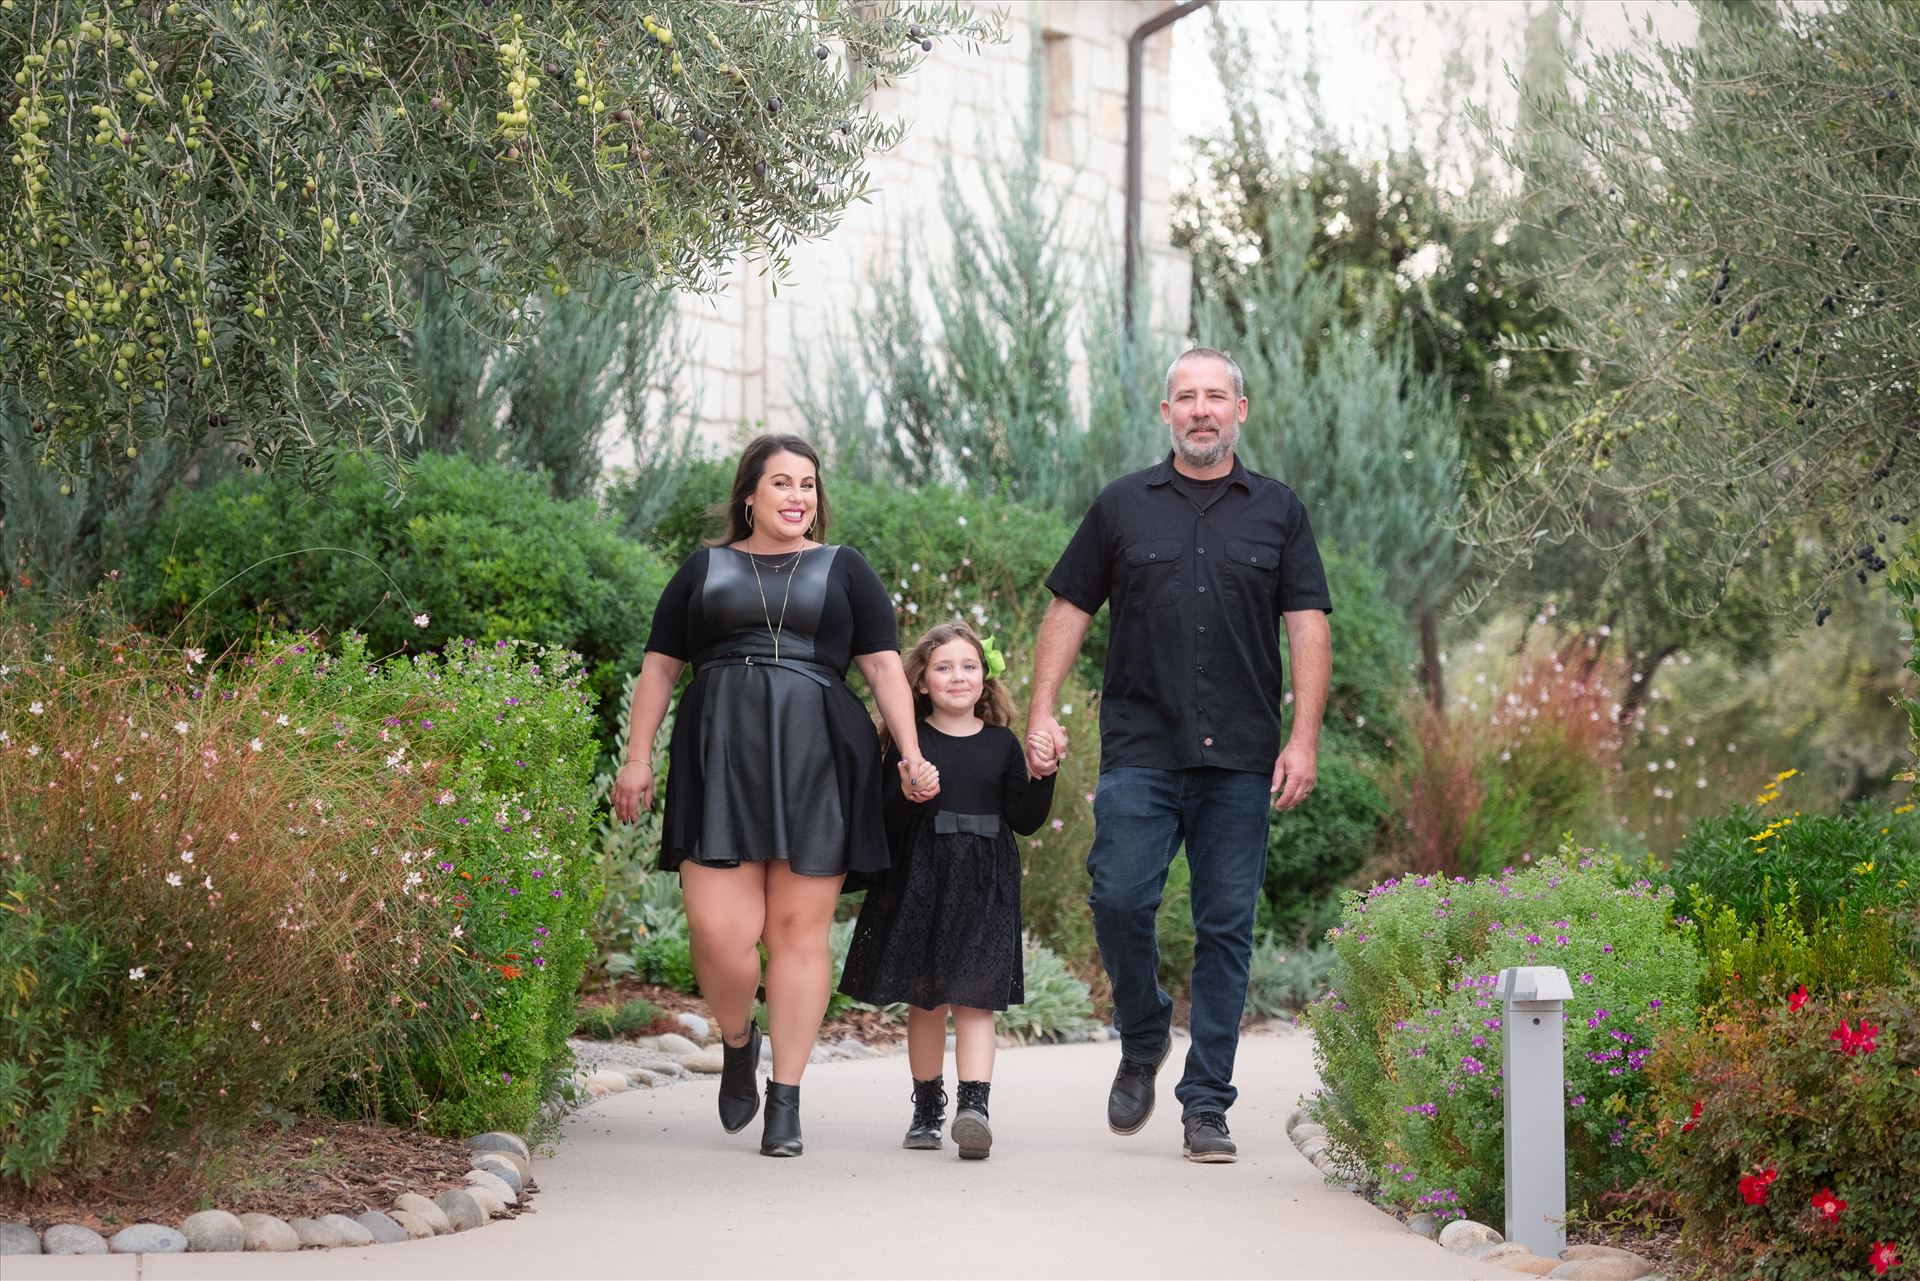 Final-8248.JPG Sarah Williams of Mirror's Edge Photography, a San Luis Obispo Wedding, Engagement and Portrait Photographer, captures the Foster Family Fall Session at the gorgeous Allegretto Resort and Vineyards in Paso Robles, California. Walk the paths by Sarah Williams